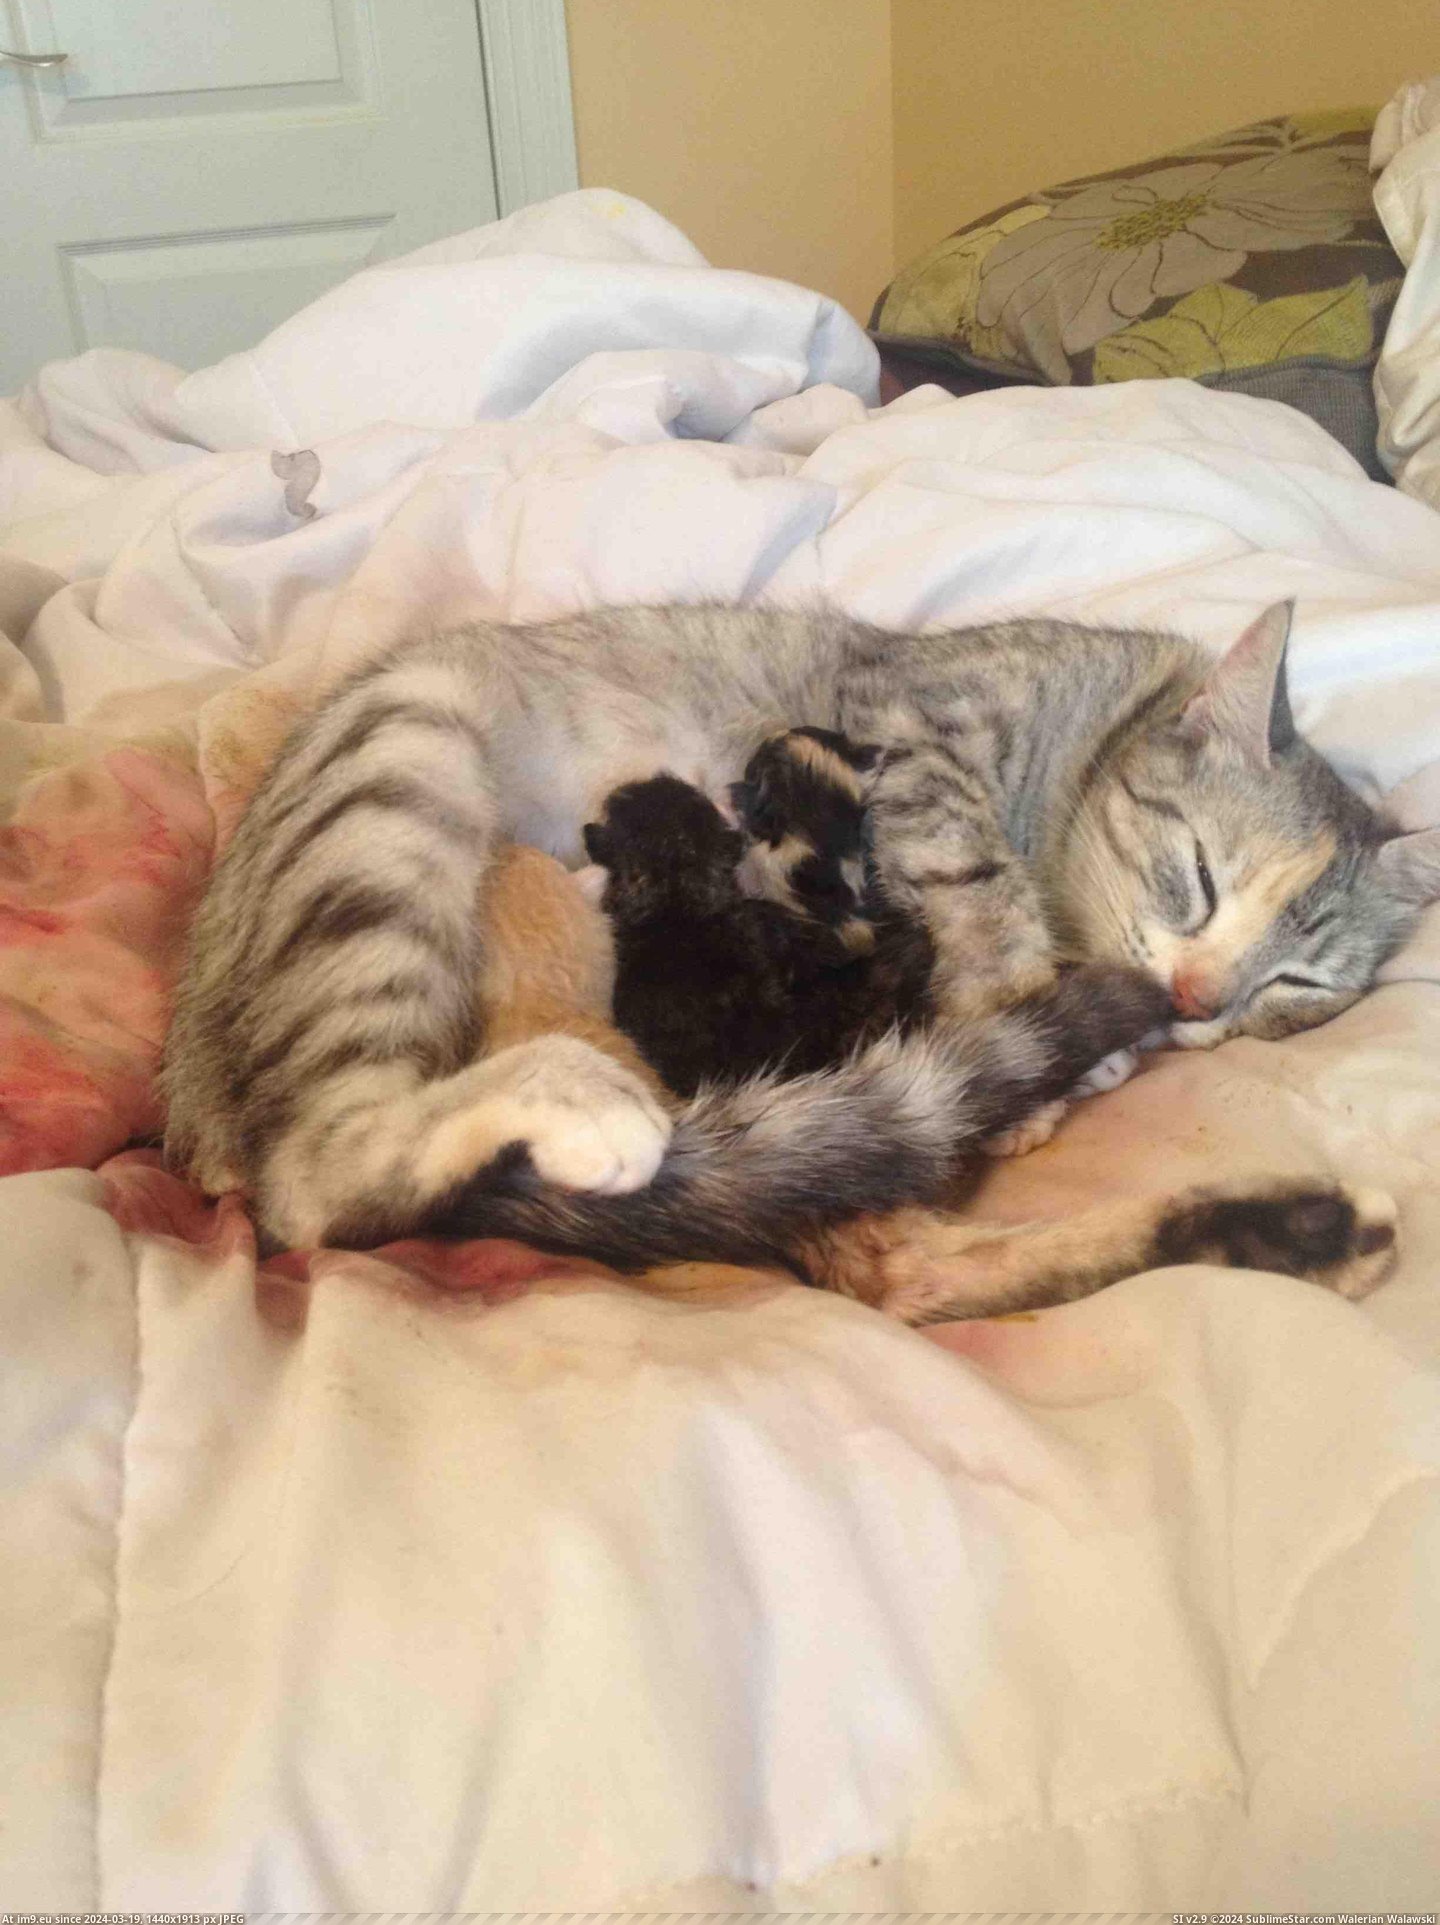 #You #Cat #Bed #She #Wake #Babies #Joking #Can #Had #Find #Guess [Aww] I've been joking that I will wake up and find my cat had her babies in bed with me. I'm sure you can guess where she had h Pic. (Изображение из альбом My r/AWW favs))